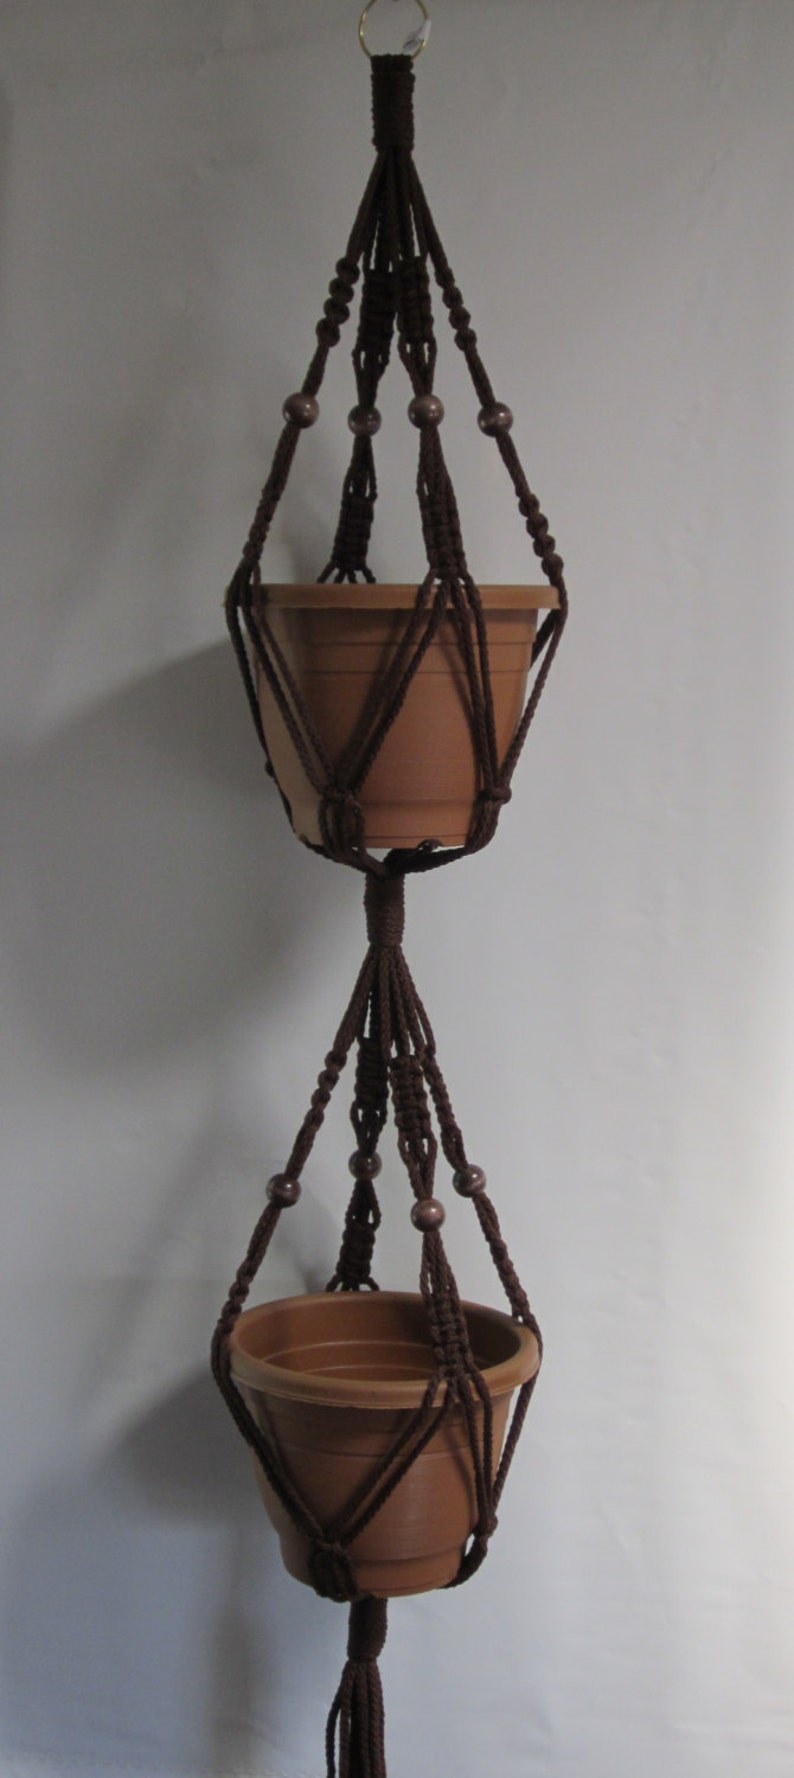 Macrame Plant Hanger 50 Inch 2-TIER with BEADS 6mm Brown Cord Choose Cord Color Double Hanger image 1